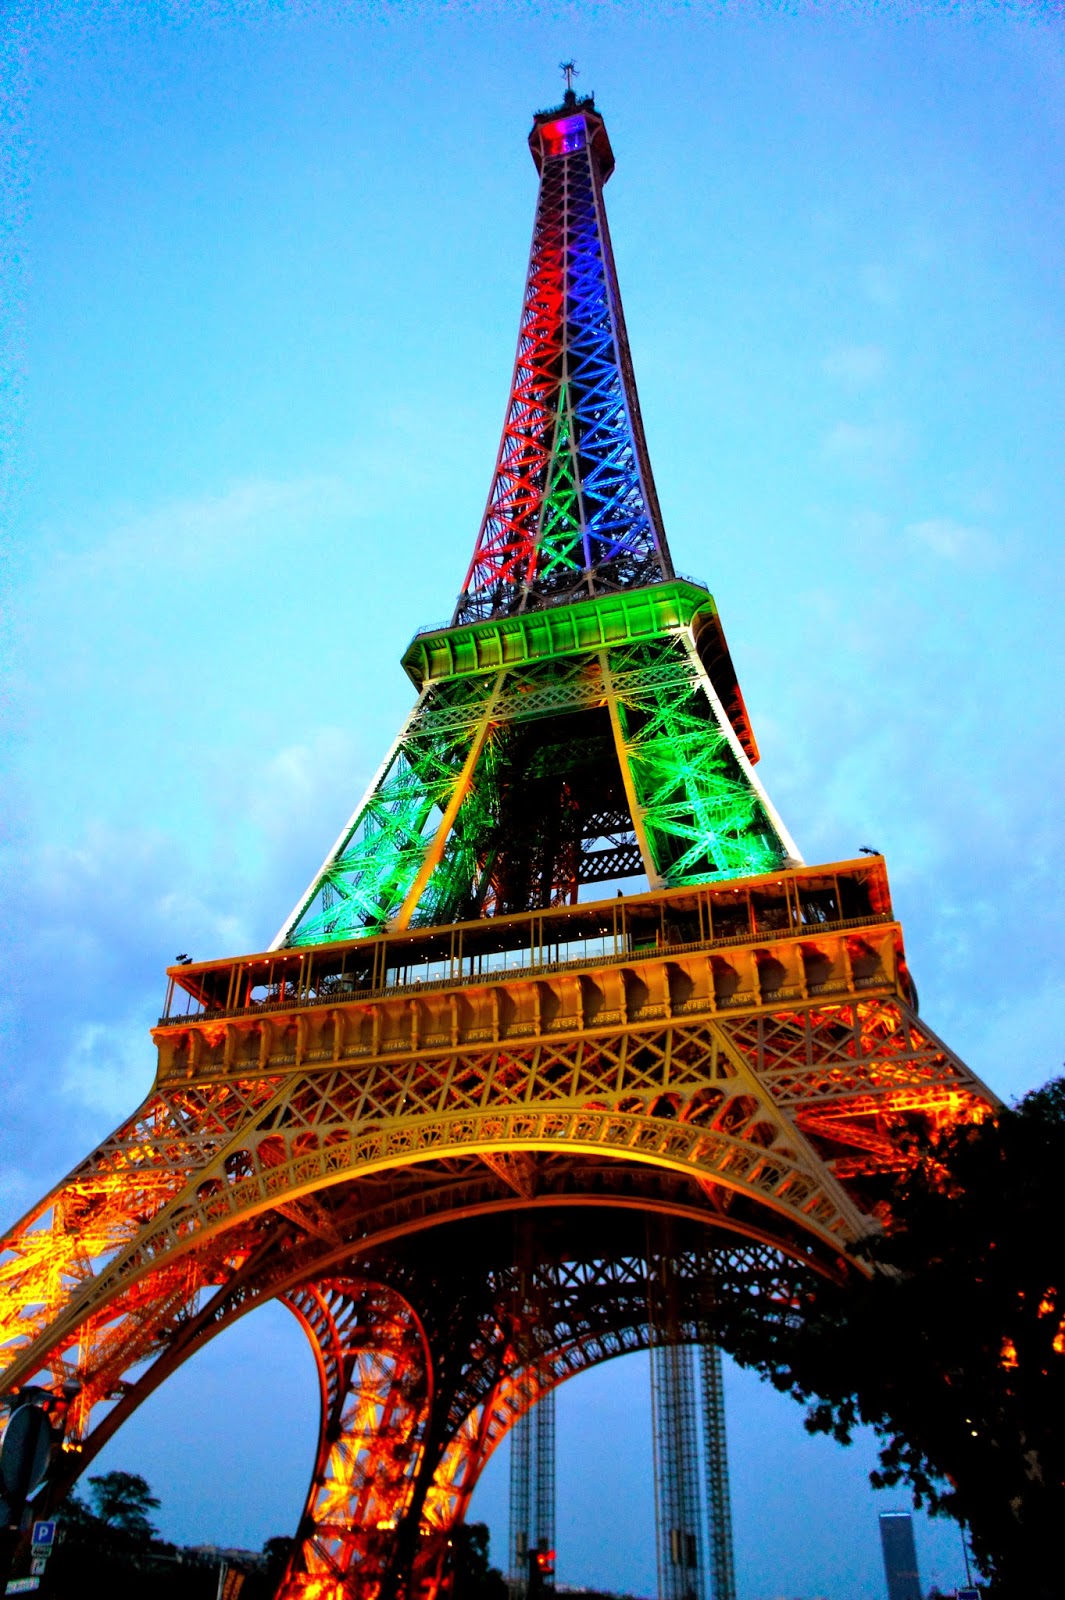 Travel for Pleasure: Visit Eiffel Tower to Experience the Highest